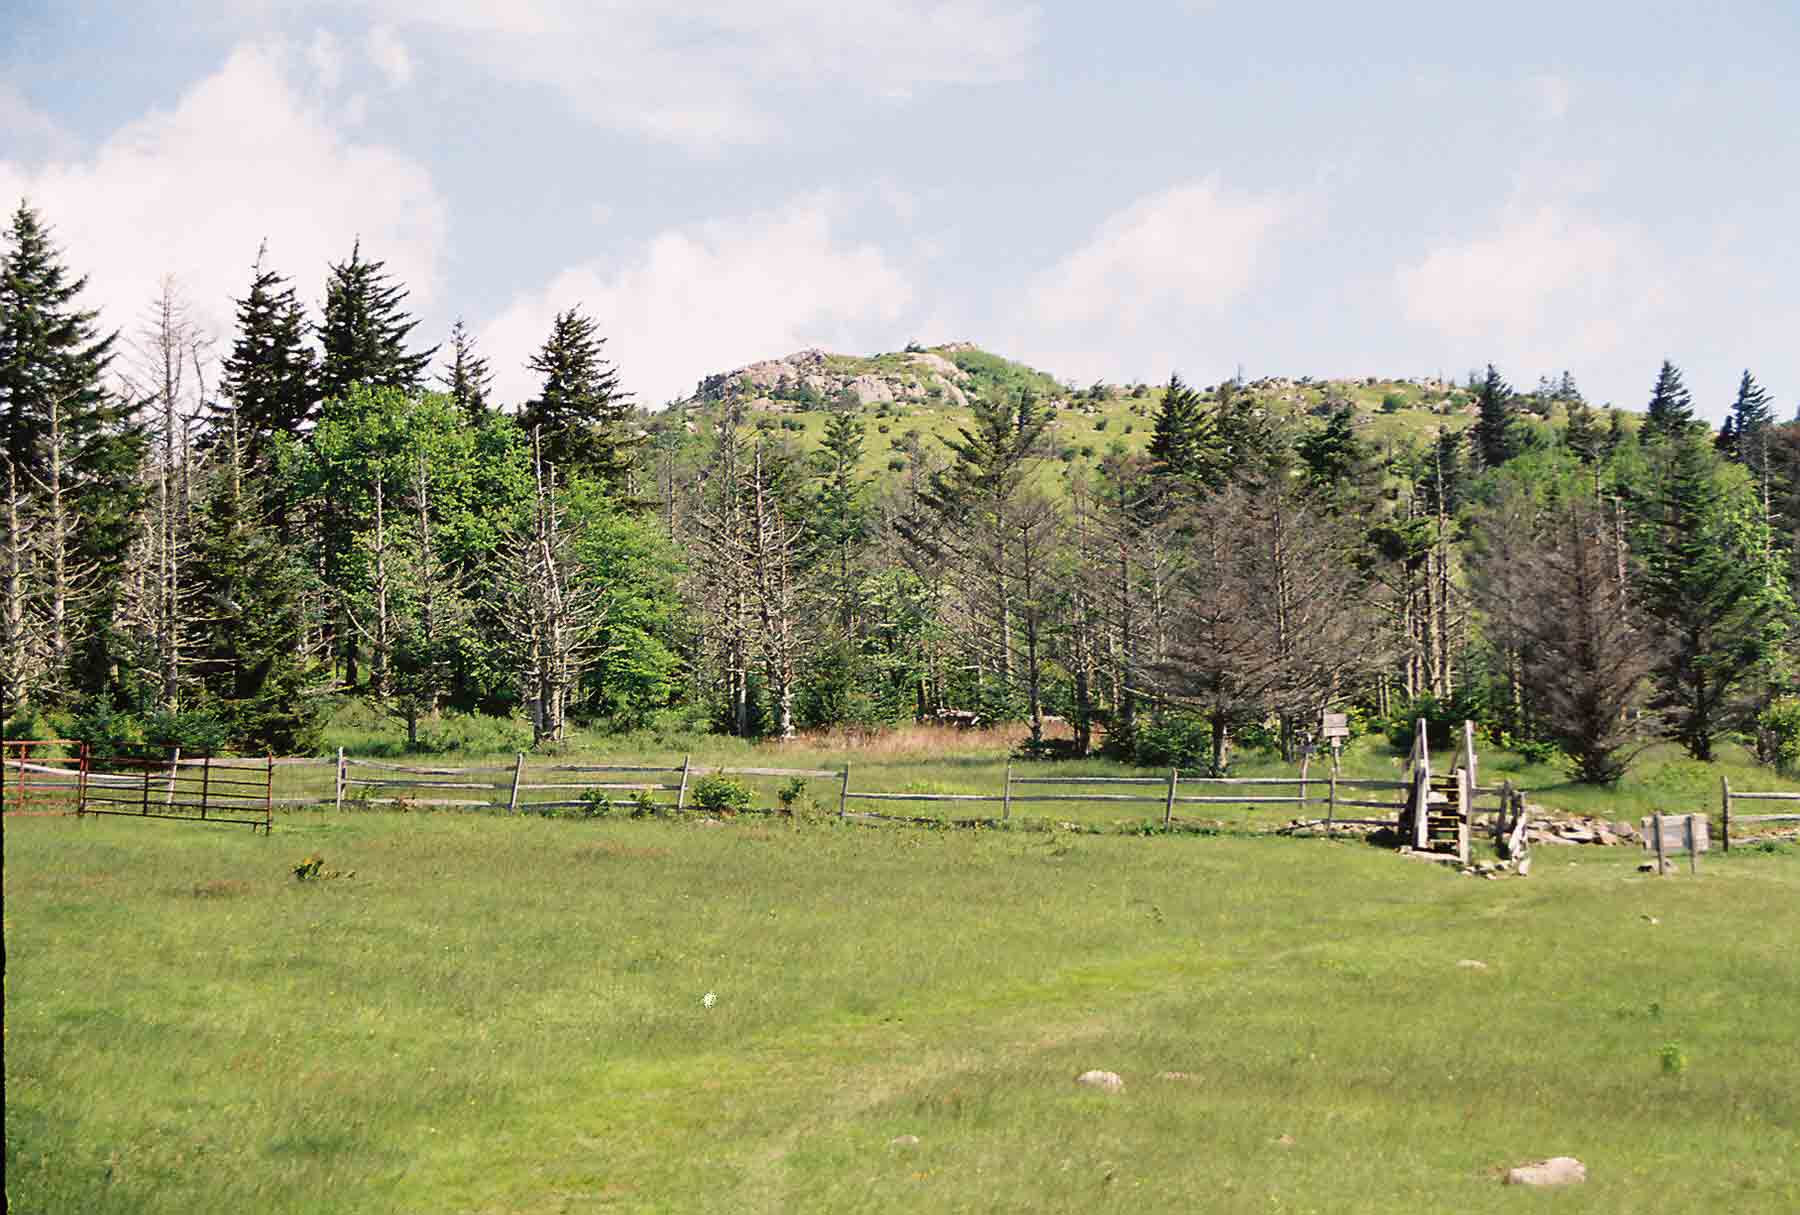 mm 10.3 - Boundary fence between Mt. Rogers NRA and Grayson Highlands State Park. Wilburn Ridge begins in background. The AT crosses the fence on a stile, and starts to climb ridge. This picture was taken in May 2004. 
	The next picture indictes that there has been some change since then. Courtesy dlcul@conncoll.edu